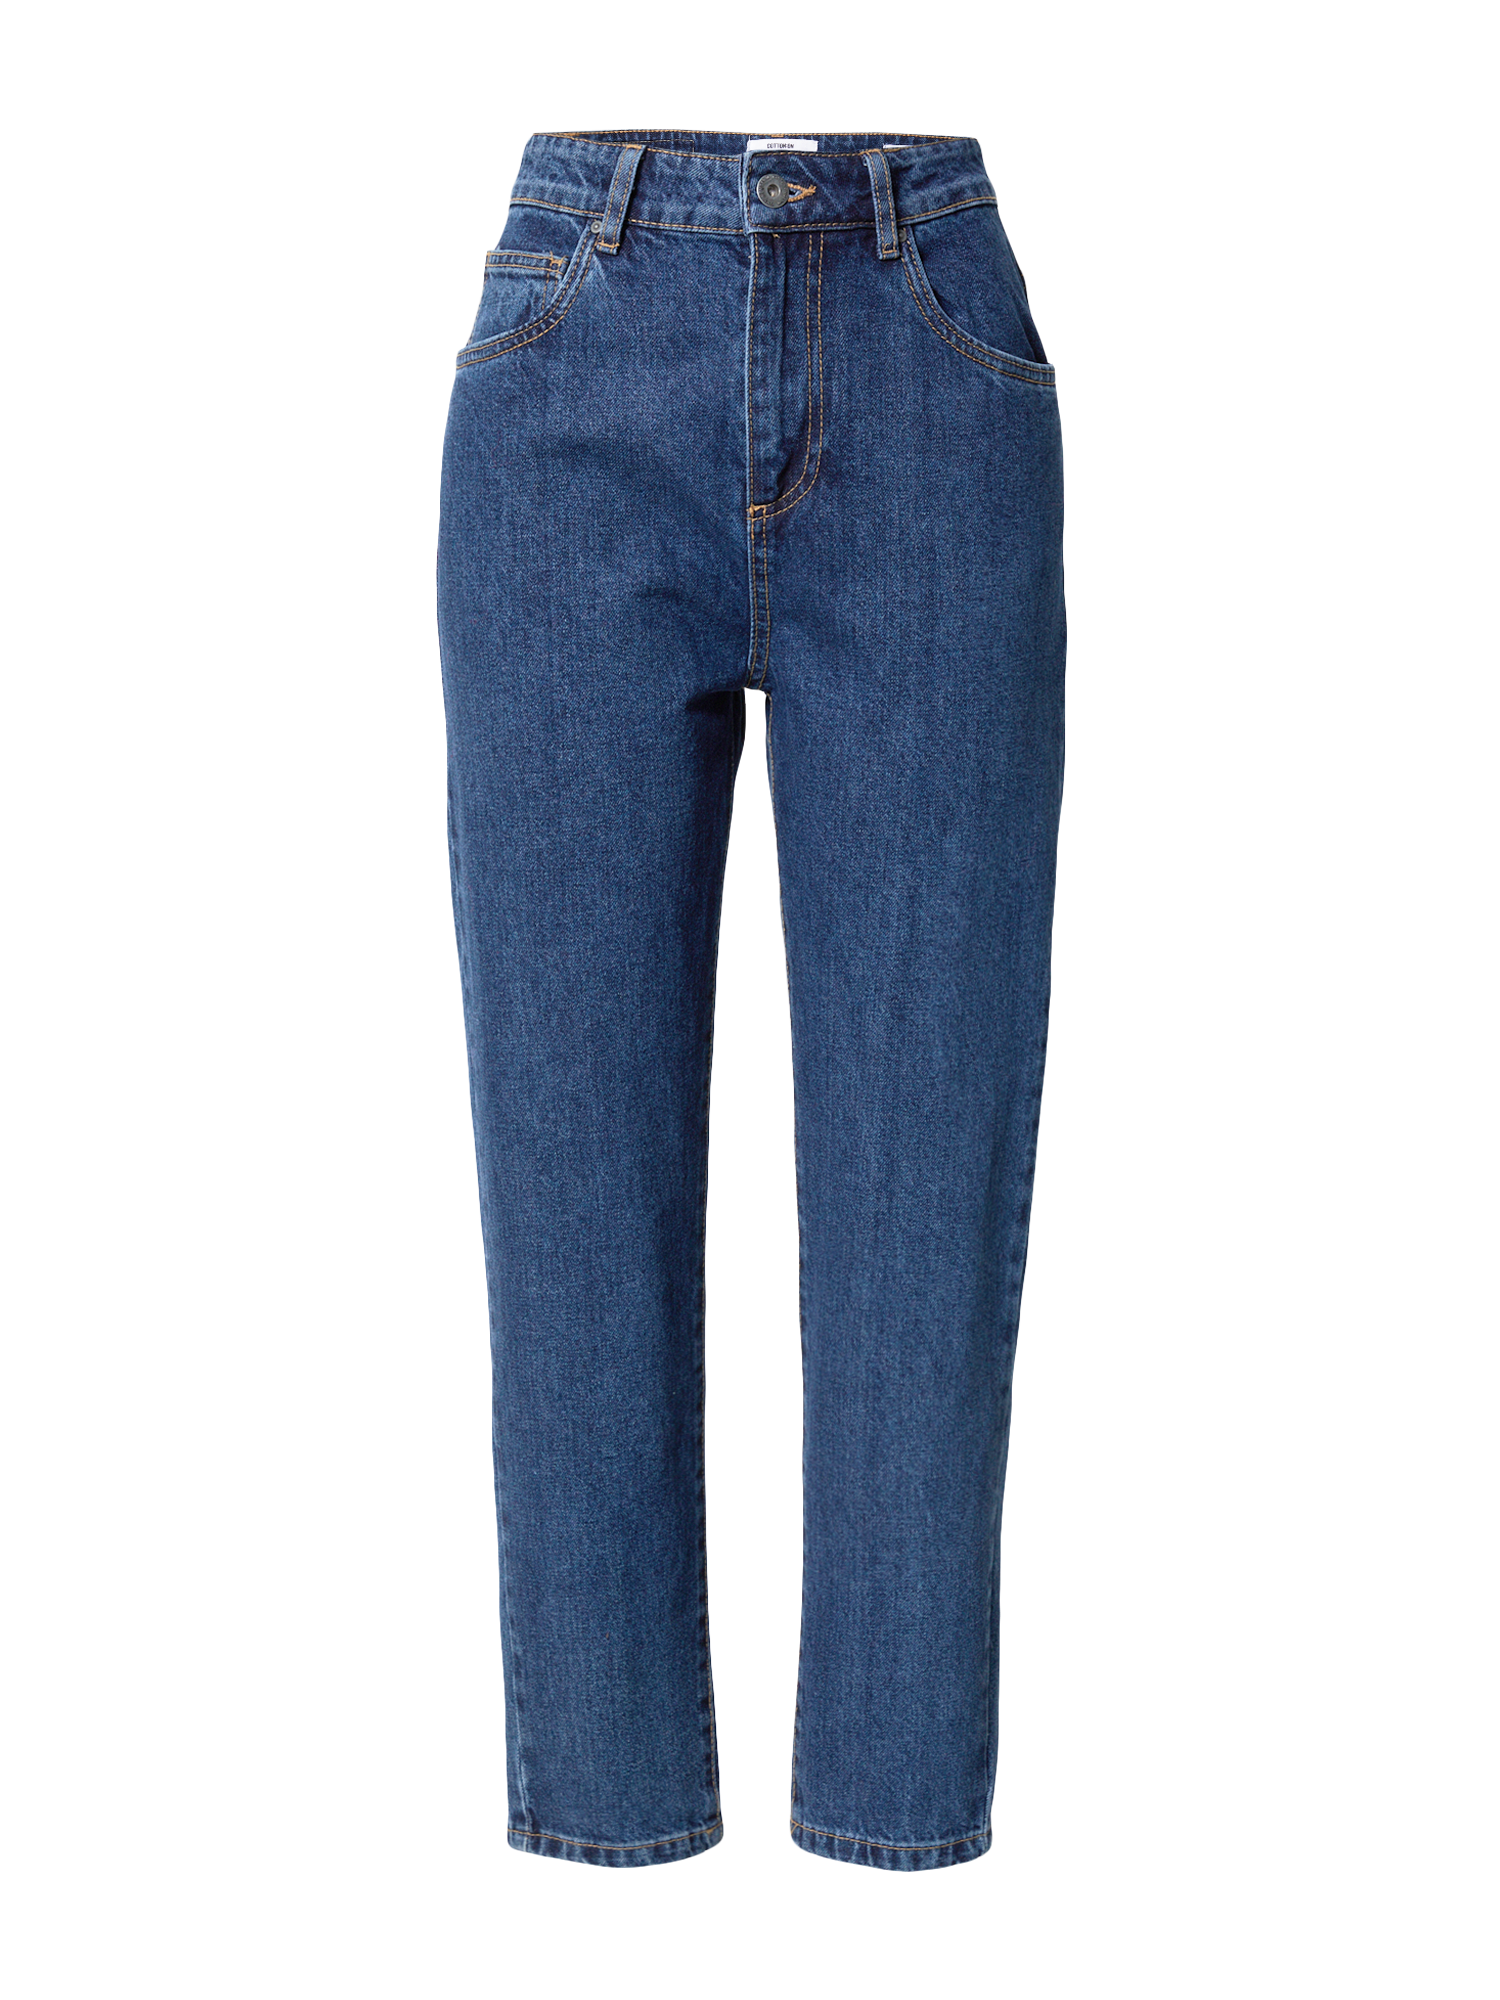 AaWso Taglie comode Cotton On Jeans in Blu 